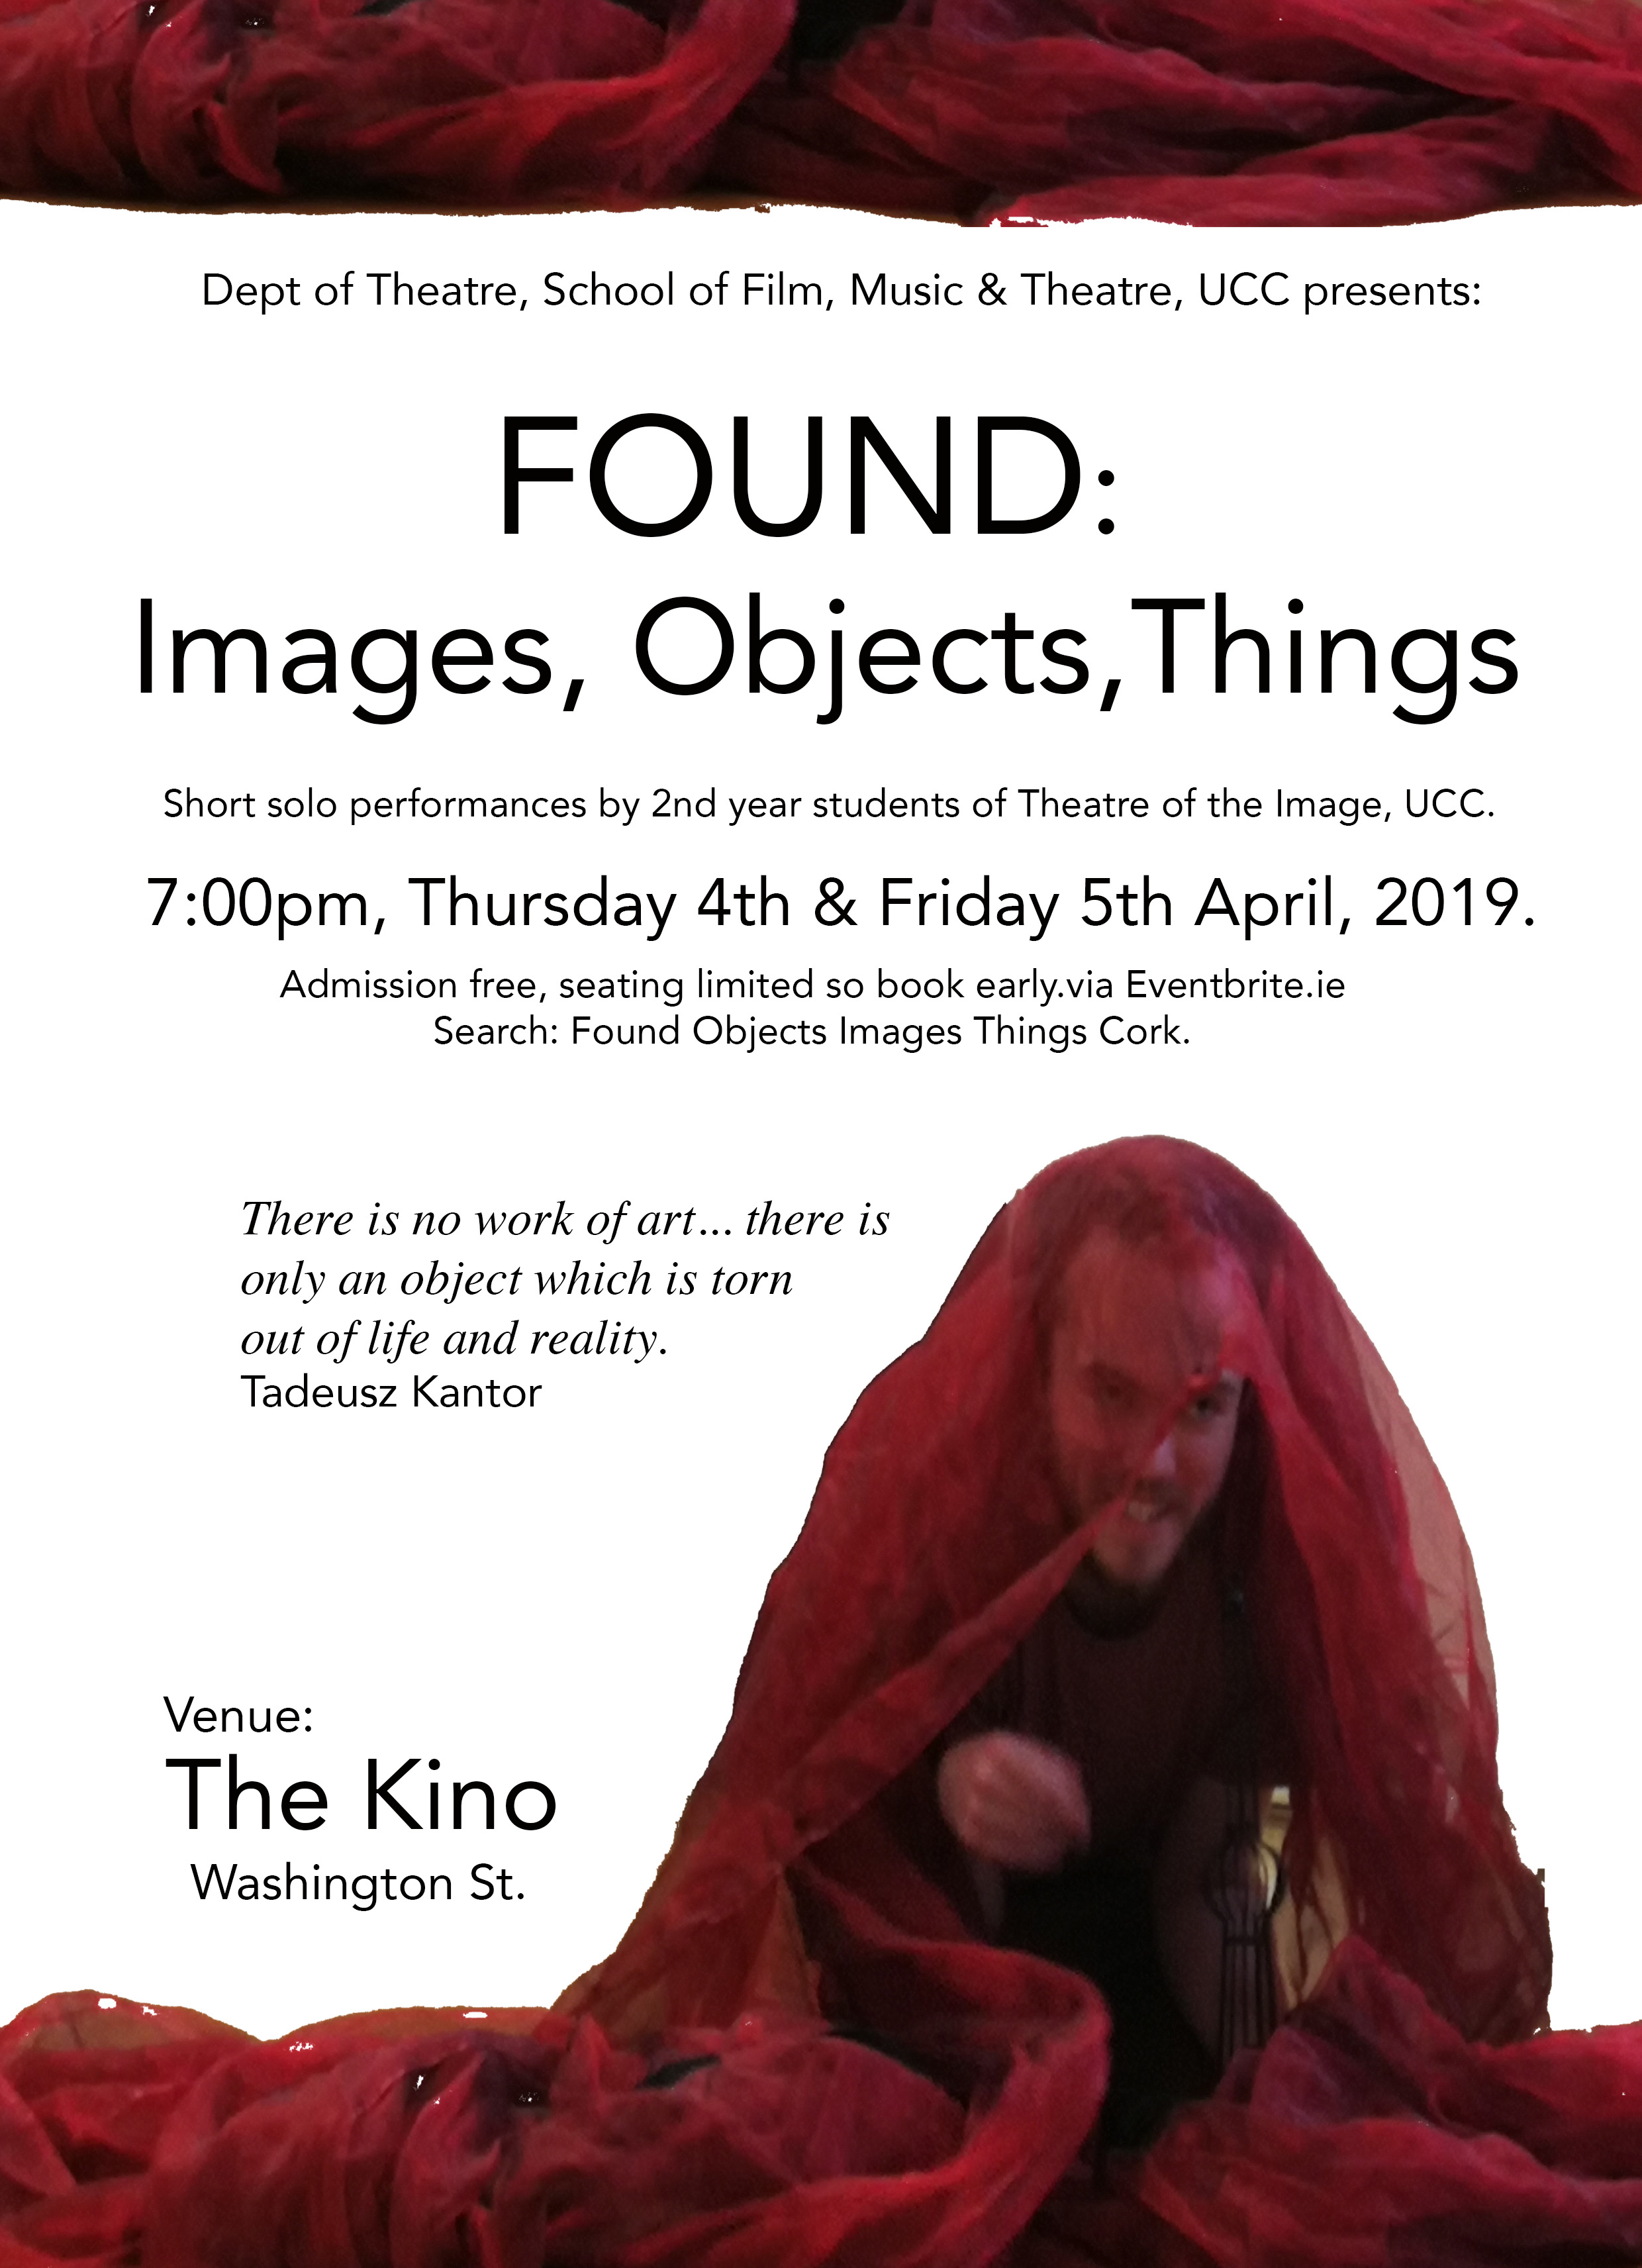 FOUND:
Images, Objects, Things